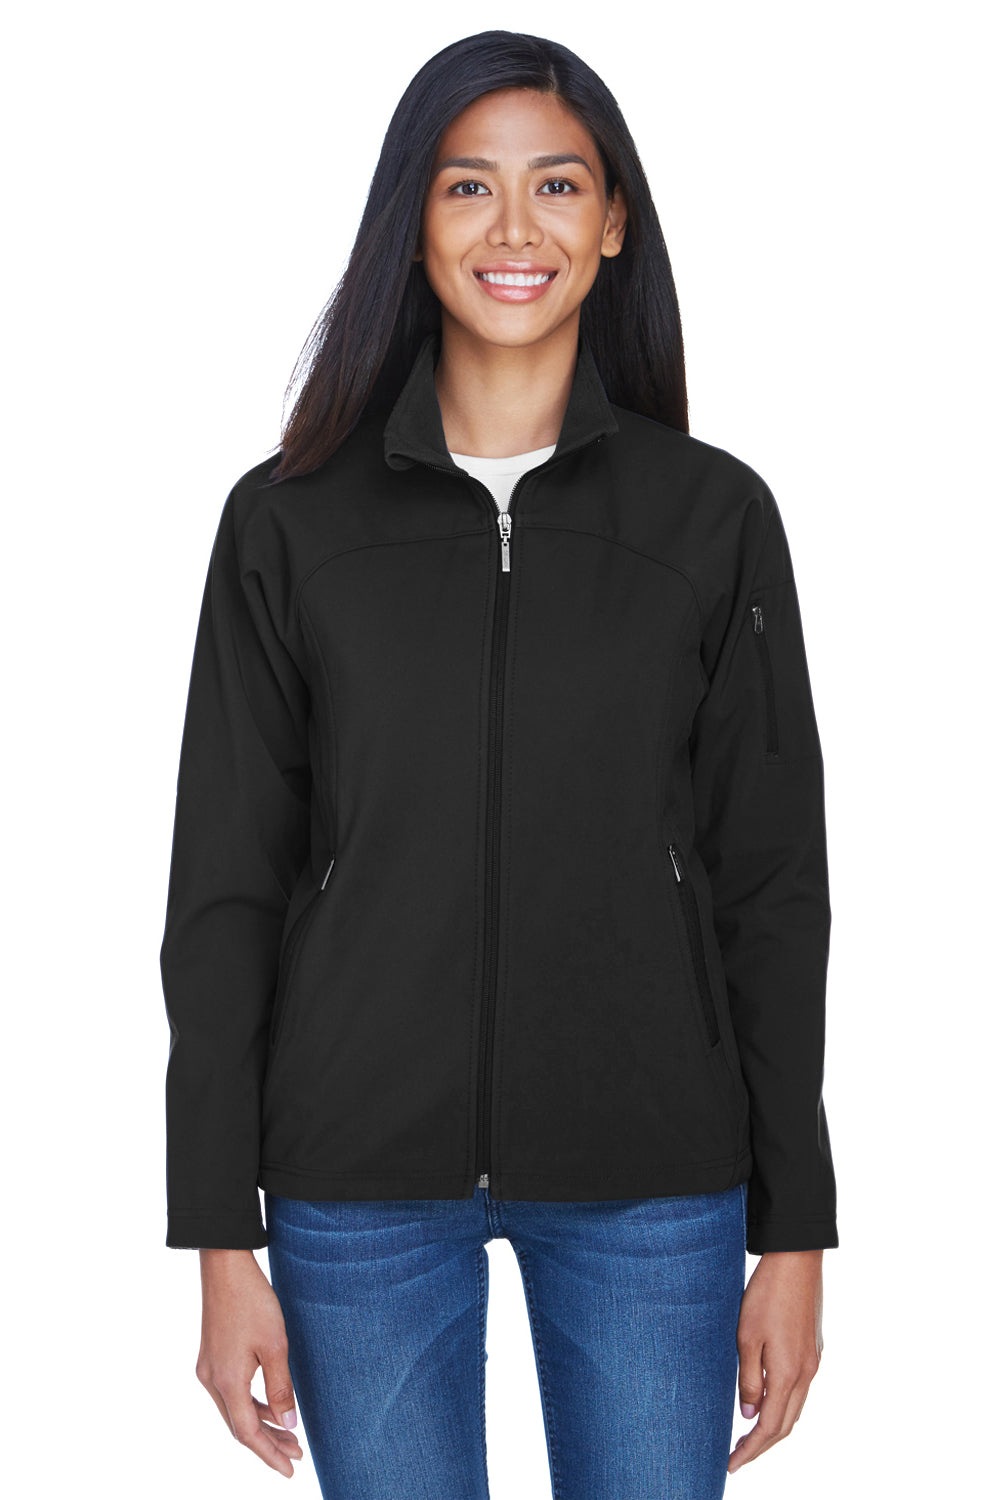 North End 78034 Womens Performance Water Resistant Full Zip Jacket Black Front